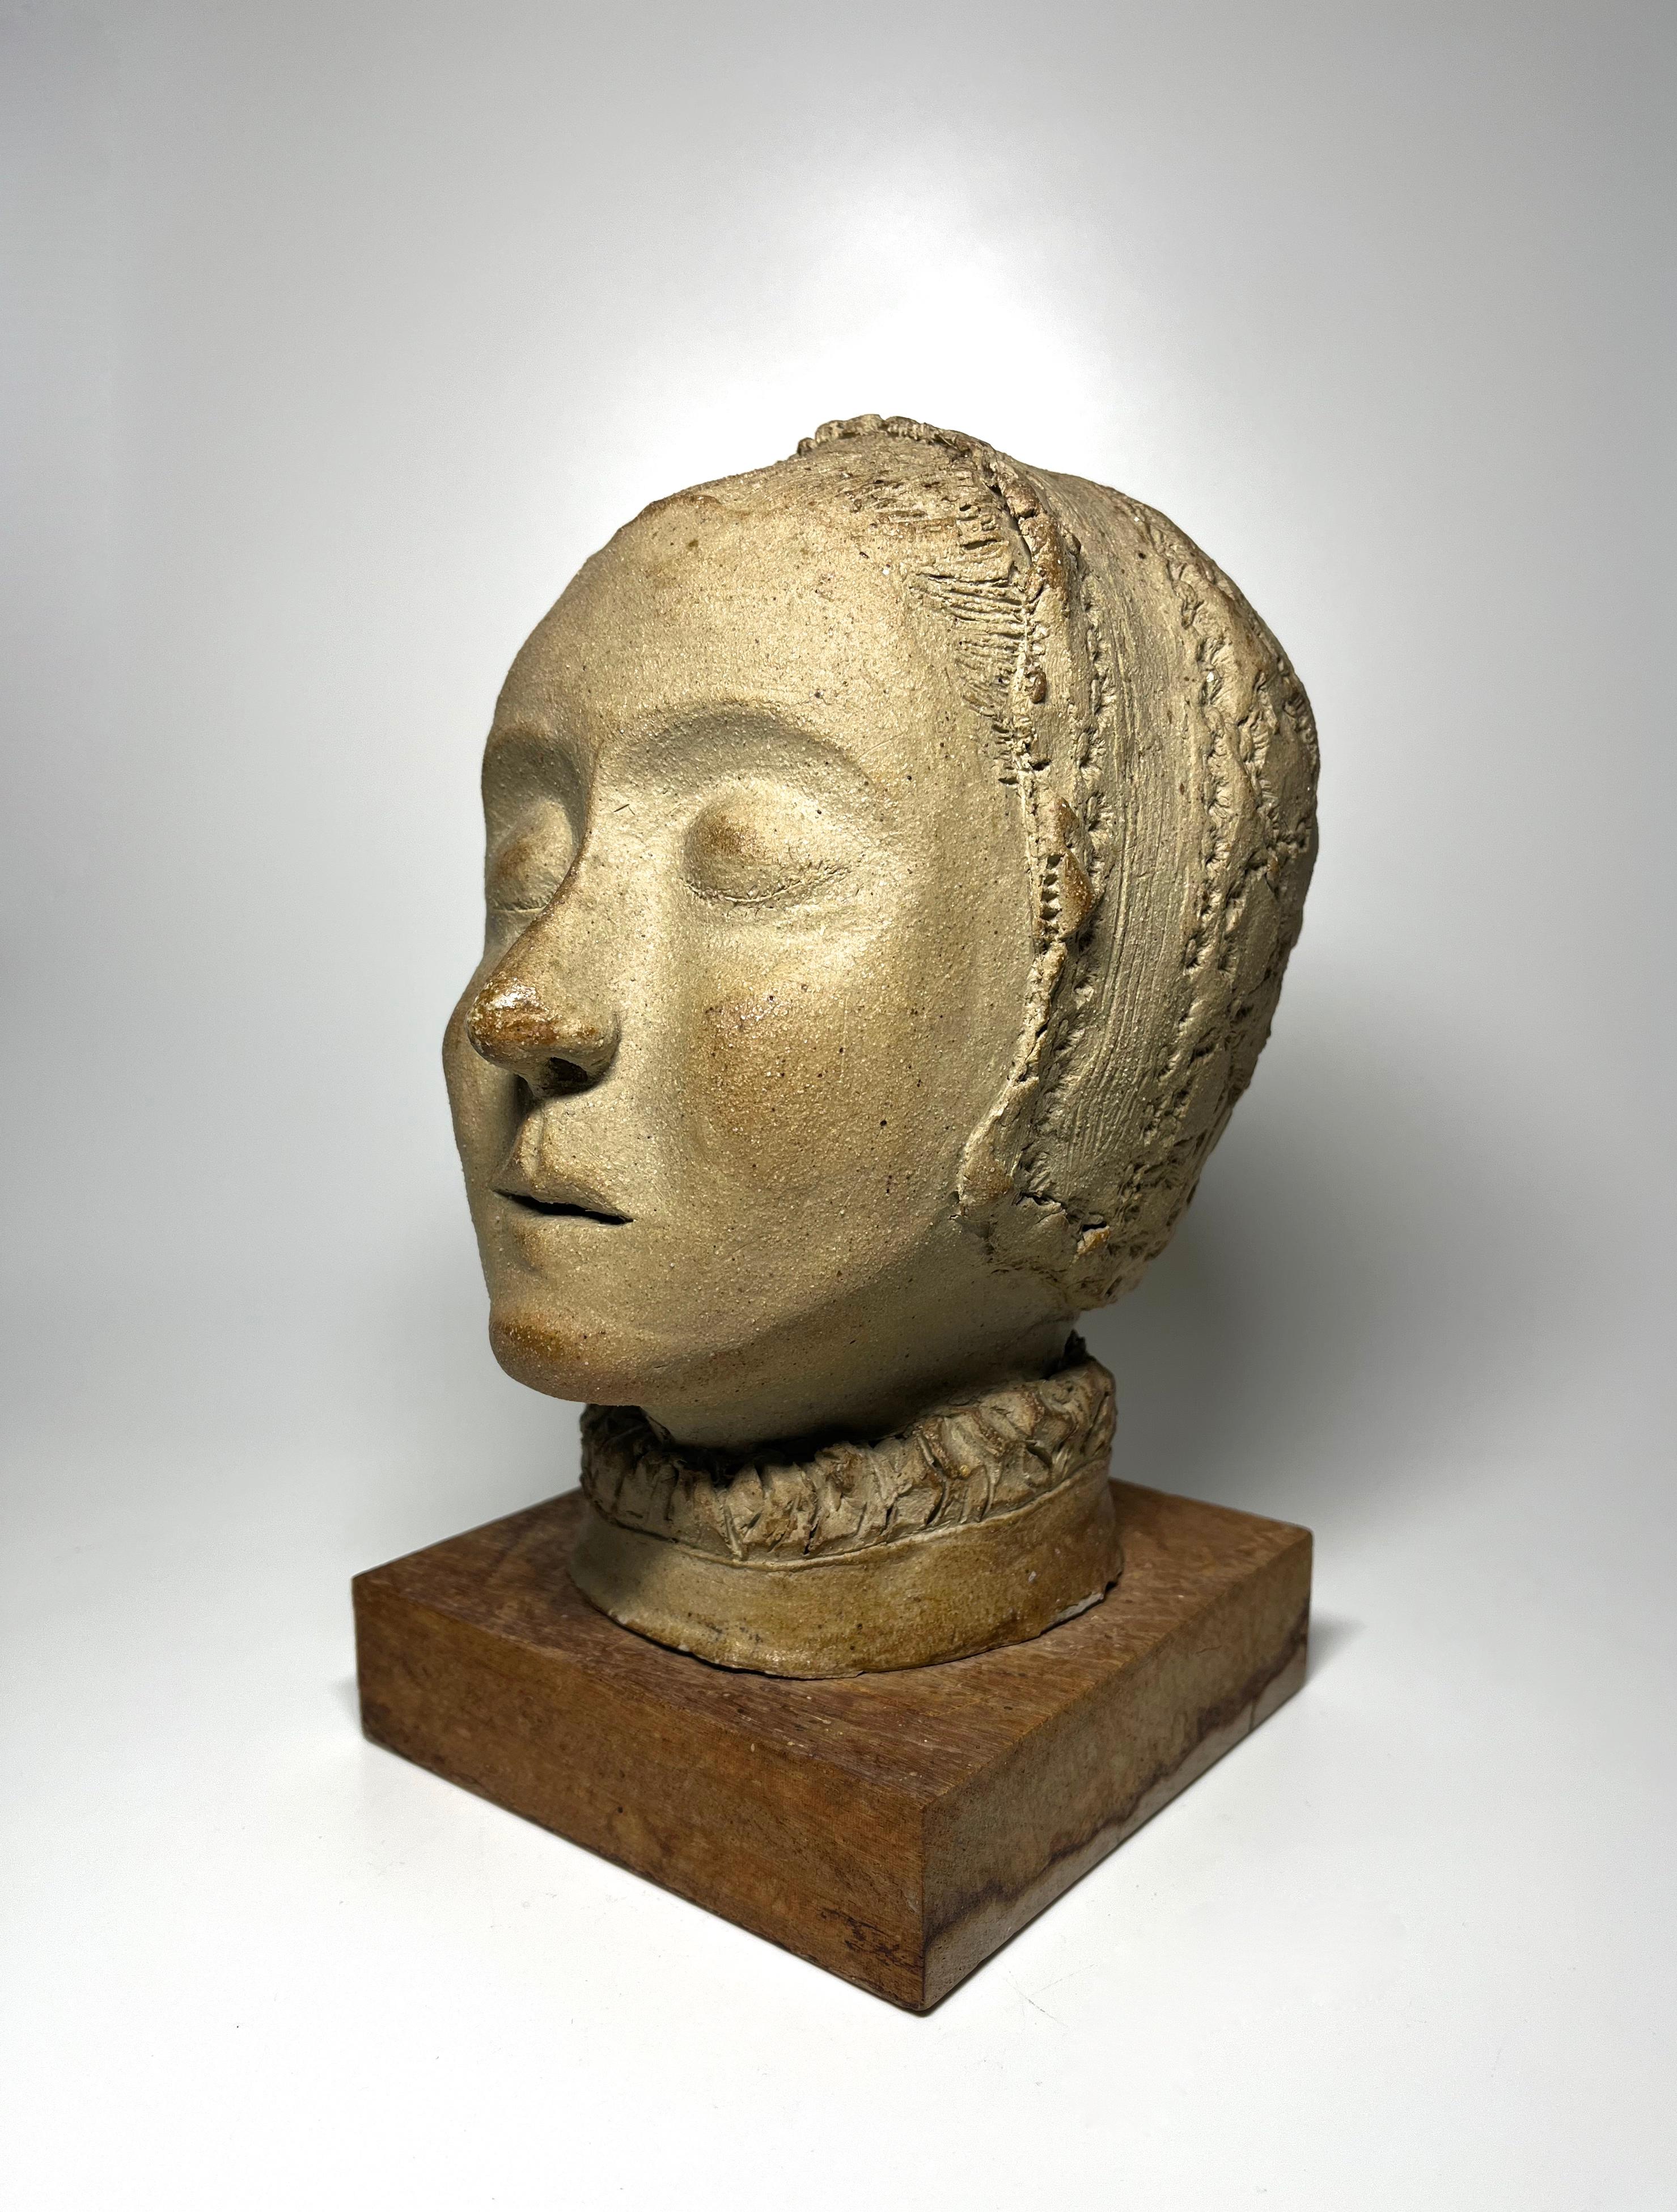 Graceful study of a young Elizabethan woman in natural clay
Eyes closed, wearing a close fitting coif and petite ruff - perhaps a final true portrait 
Signed with initials E J to nape of neck
Stands freely on a simple wooden plinth
Circa